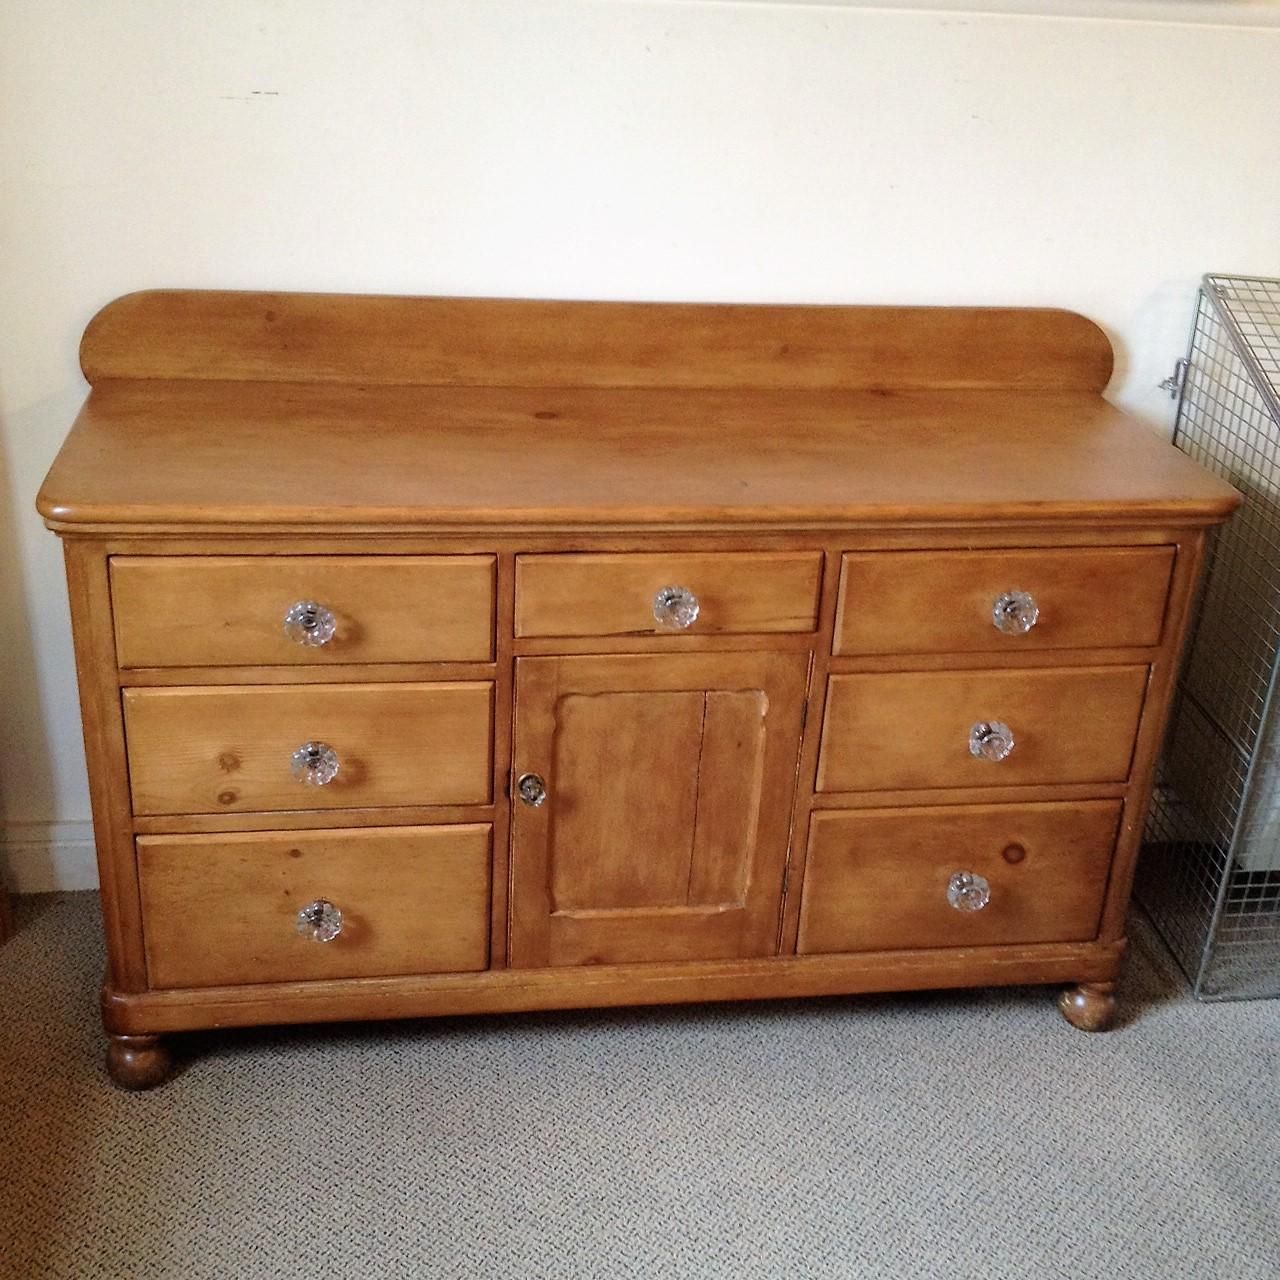 Victorian Pine Dresser Base With 7 Drawers And Central Cupboard